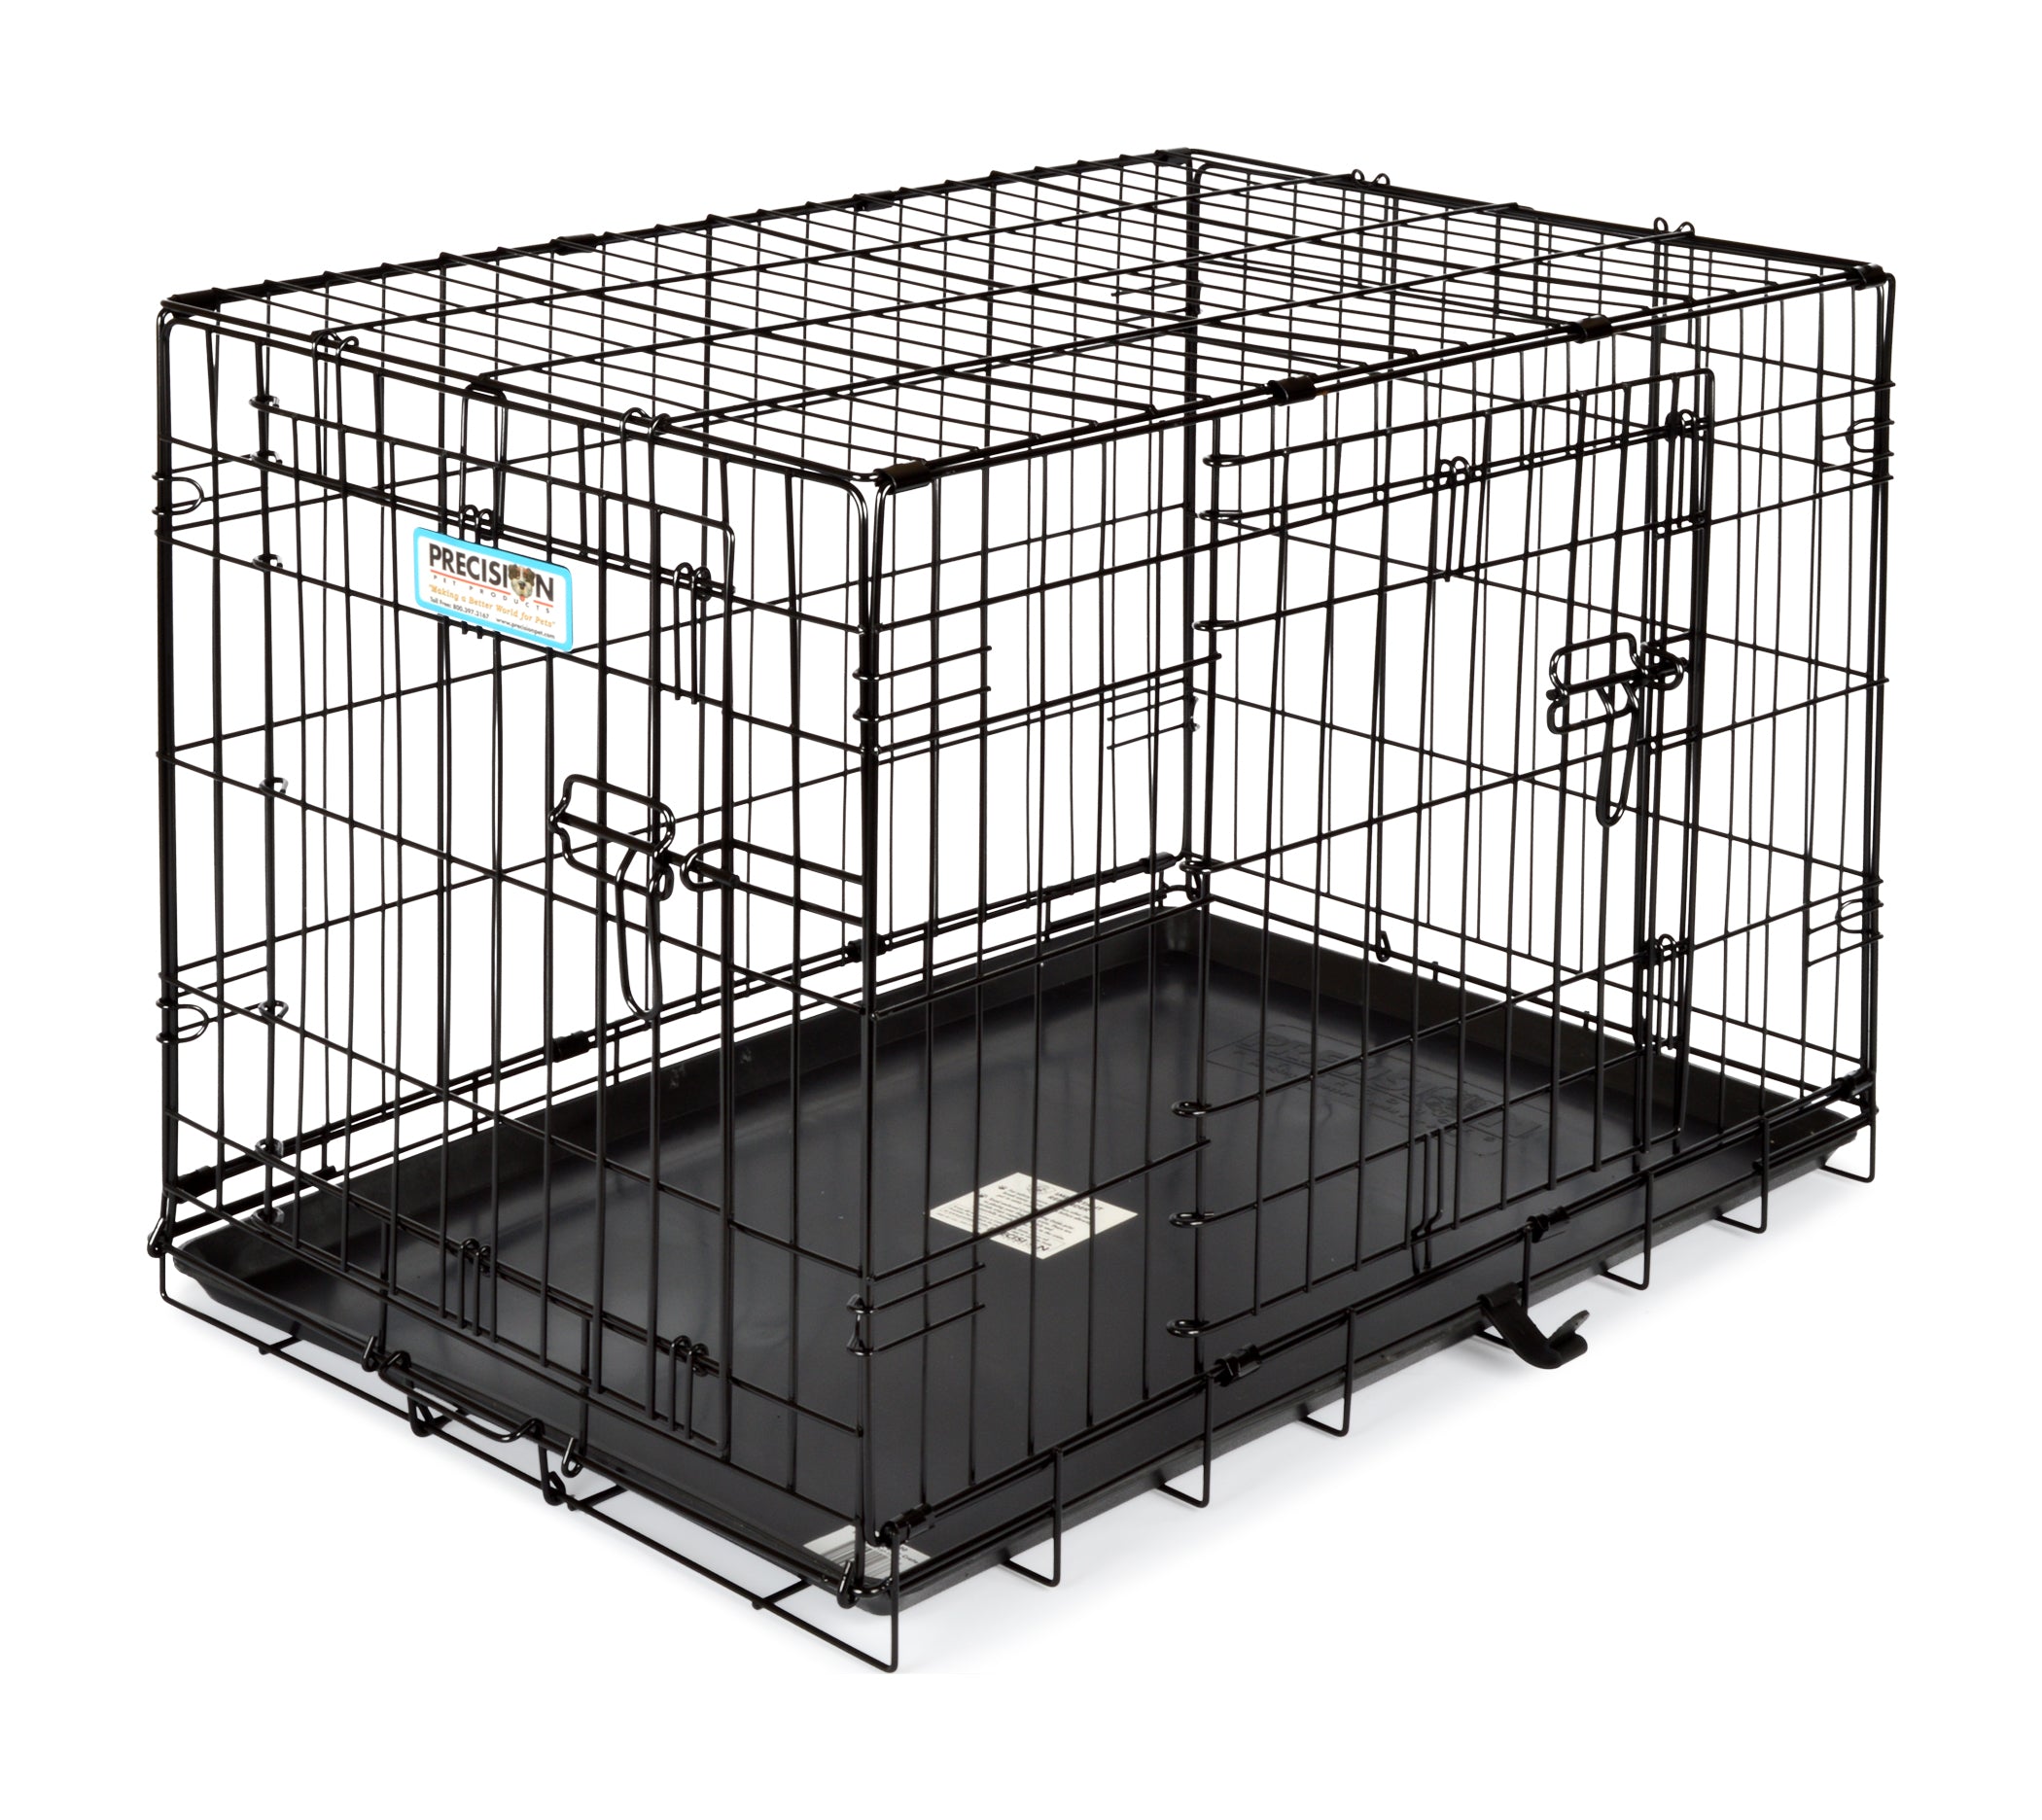 Precision Blue Provalu 2 Door Dog Crate ， up to 25 lbs